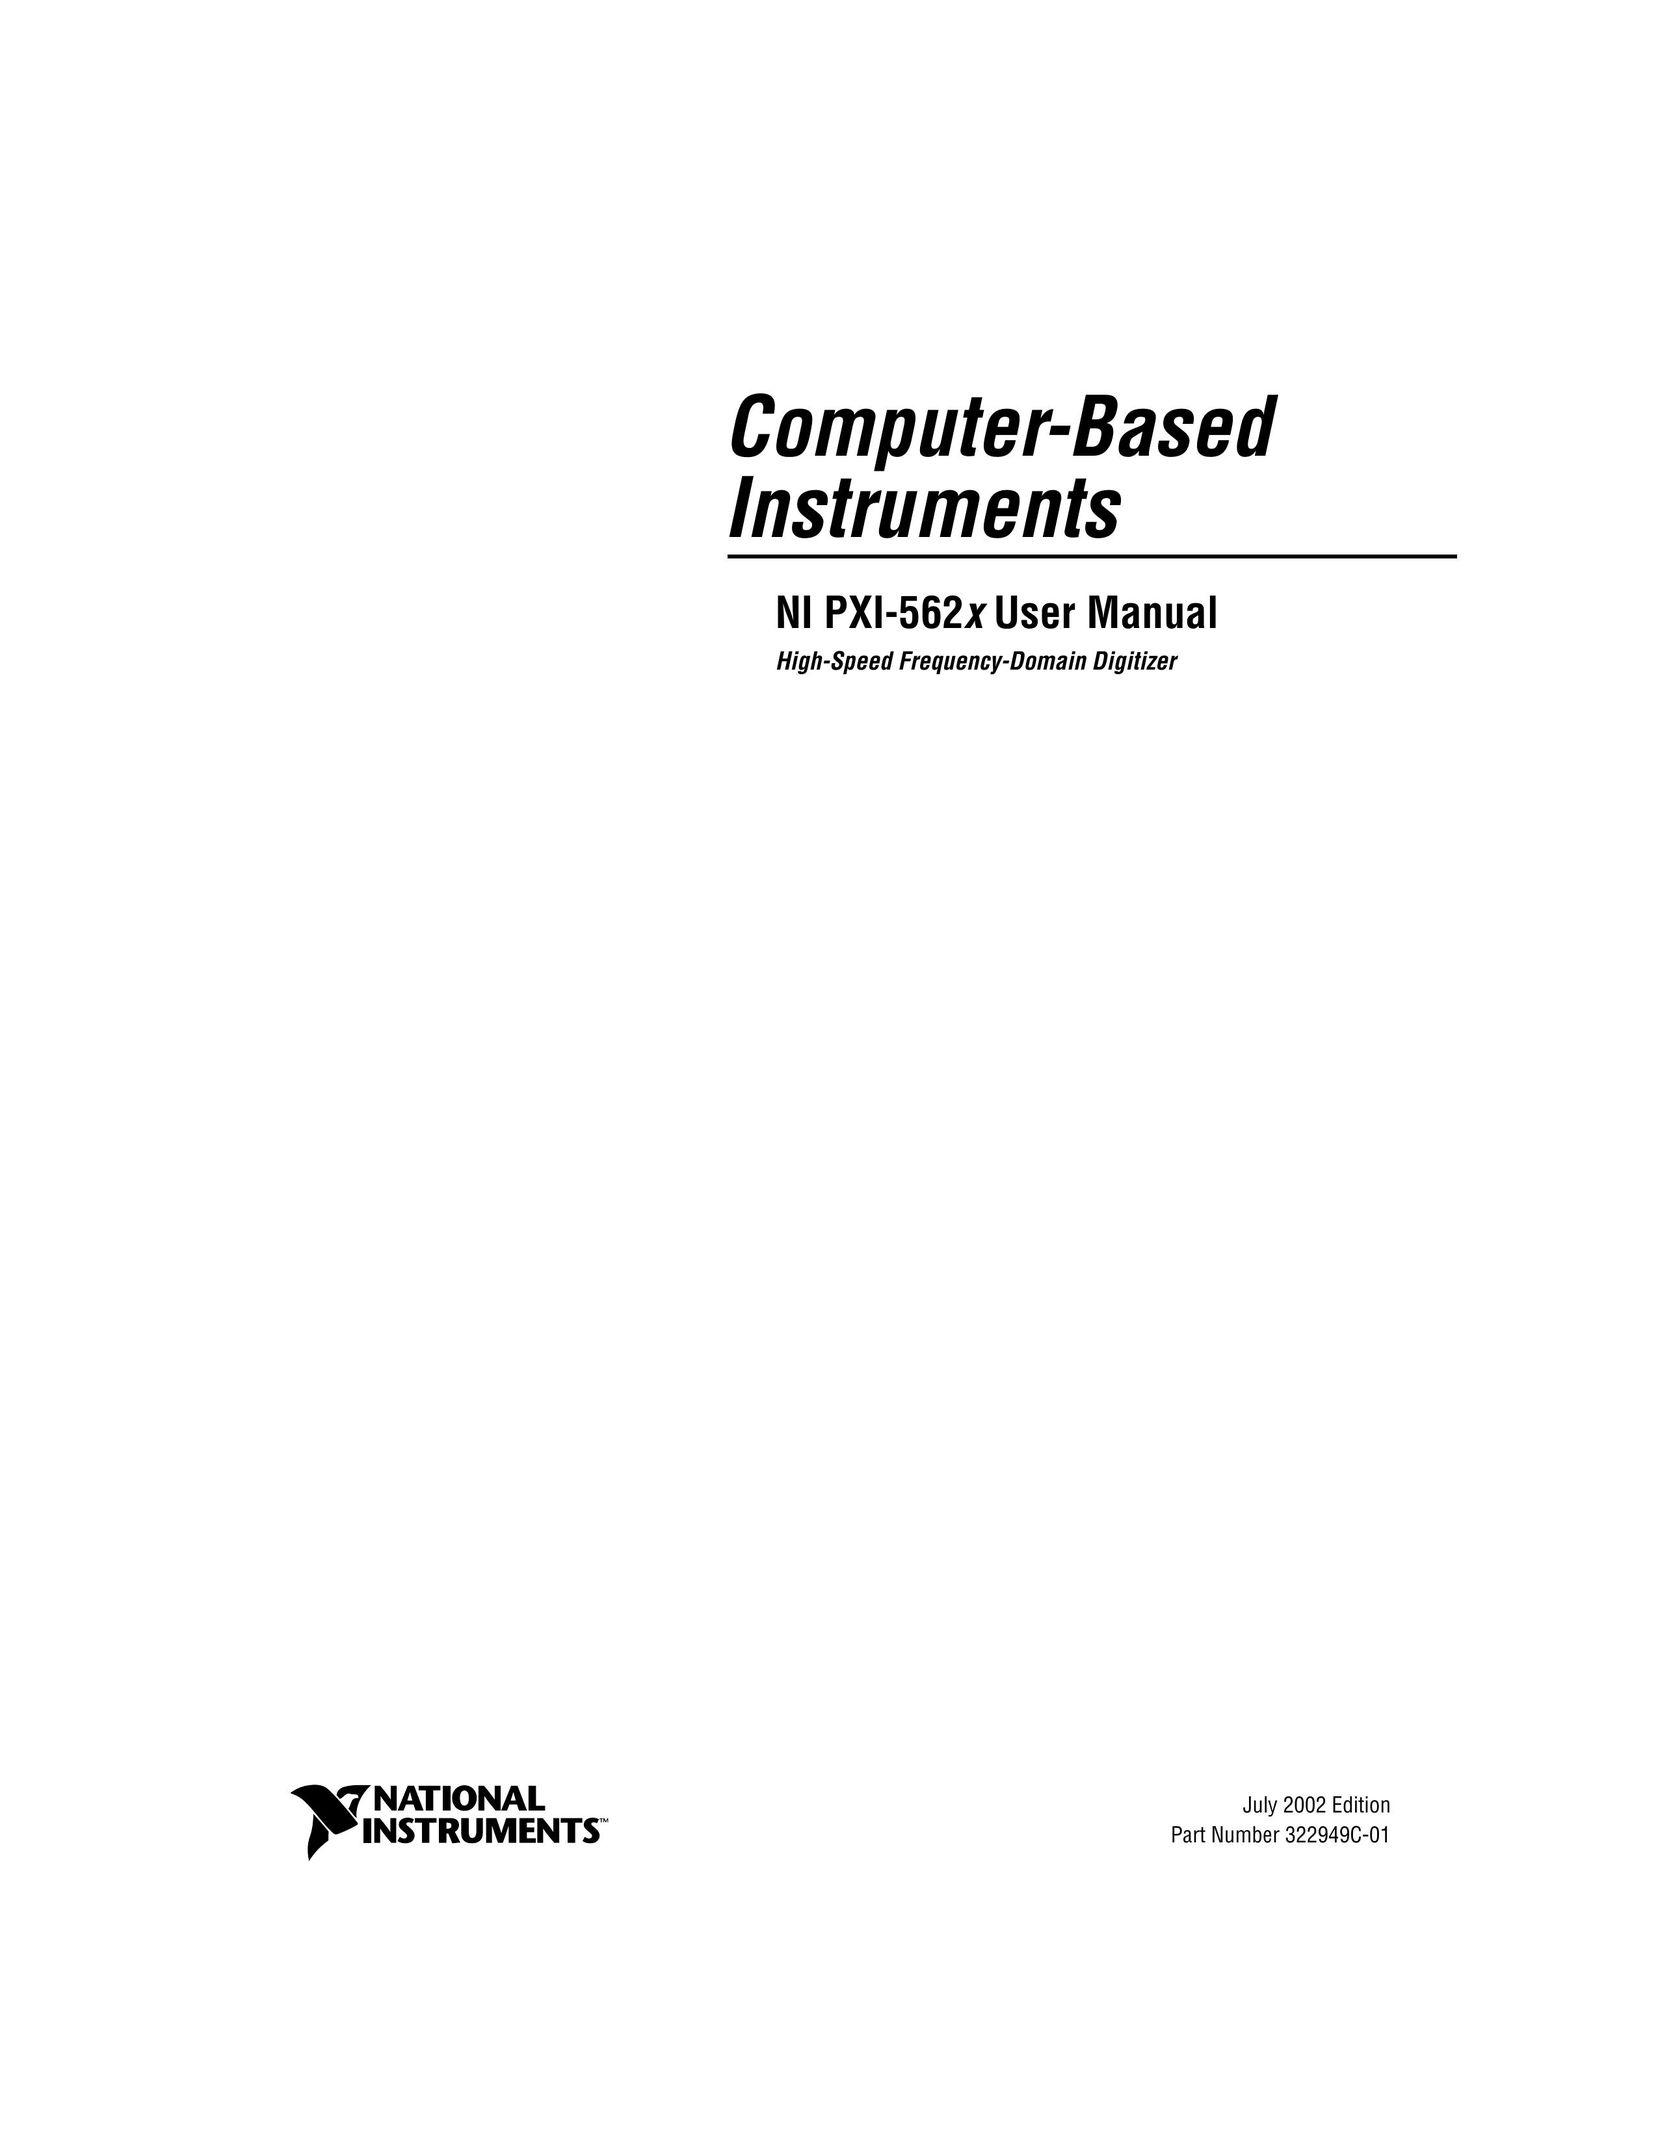 National Instruments NI PXI-562X Graphics Tablet User Manual